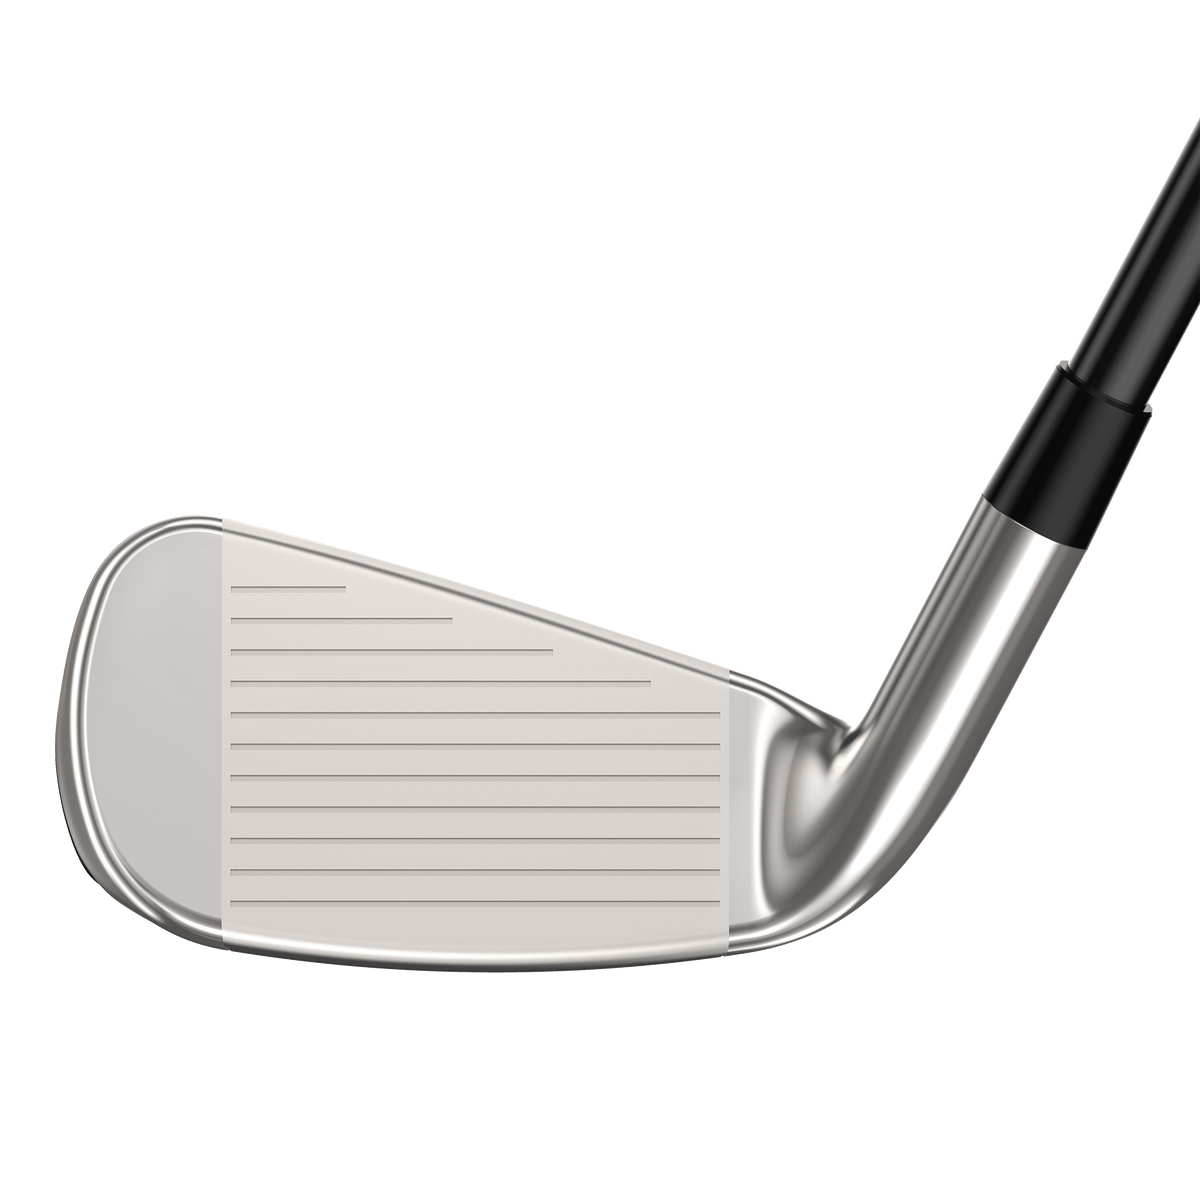 Cleveland Launcher HB Turbo Irons · Right handed · Graphite · Senior · 5-PW,DW